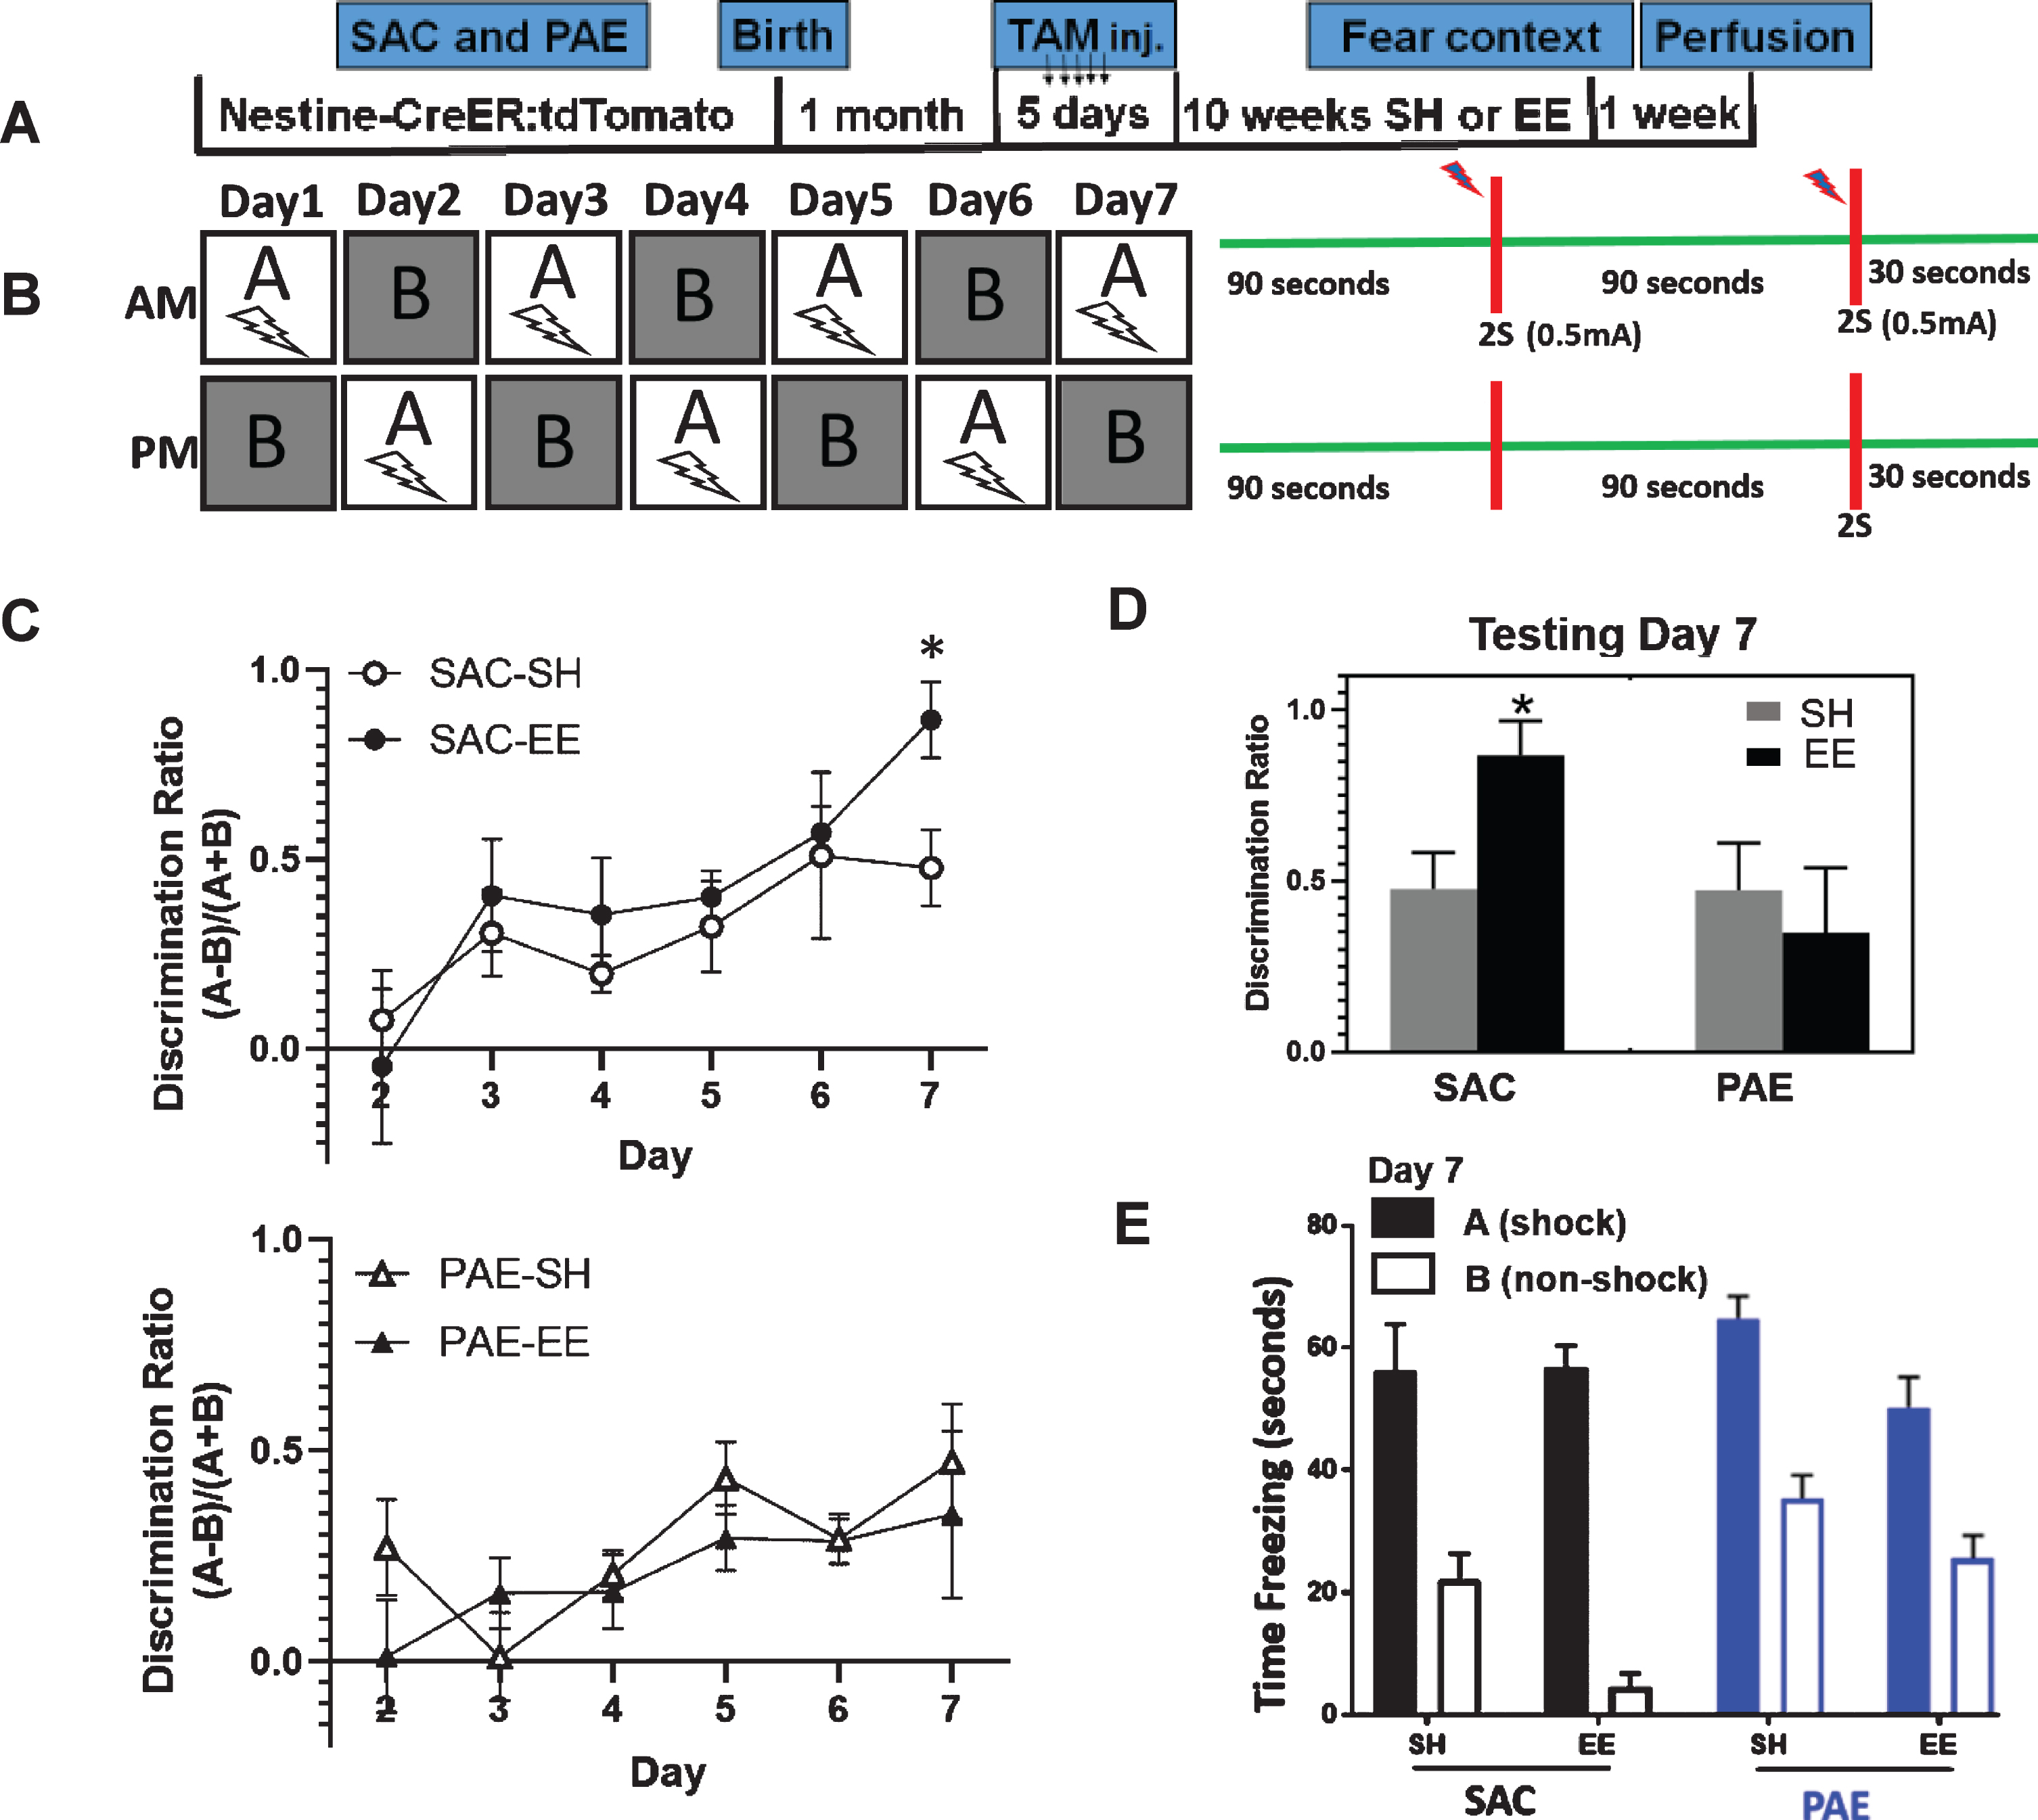 PAE impairs EE-mediated improvement A-B context fear discrimination learning. A. Experimental timeline. SAC and PAE Nestin-CreERT2:tdTomato mice received tamoxifen dosing to induce reporter expression in aDGCs and were subjected to SH or EE housing conditions for 10 weeks prior to behavioral testing. B. Experimental design for the A-B context fear discrimination task. Mice received two 2-second 0.5 mA foot shocks separated by a 90 second interval in Context A only. The first shock occurred 90 seconds following placement into the chamber and mice were removed from the chamber 30 seconds following the 2nd foot shock. In the non-shock context B, mice received no foot shock or other aversive event. Each mouse experienced one daily session in Context A and one daily session in Context B, separated by 3 hours. The order of context exposure was alternated each day for 7 days. Daily discrimination scores were calculated as: (freezing time context A - freezing time context B) / (freezing time context A + freezing time context B) during the first 90 seconds of each testing session. C. Discrimination learning over time. Data are plotted as the mean daily discrimination scores per group±SEM. Group n’s were as follows: SAC-SH (n = 8 mice) and SAC-EE (n = 8 mice) sampled across 5 separate litters; PAE-SH (n = 15 mice) and PAE-EE (n = 15 mice) sampled across 7-8 separate litters. Three way ANOVA statistics: testing day [F(6,250) = 325, p < 0.0001], alcohol treatment [F(1,250) = 175, p < 0.0001], housing [F(1,250) = 12.49, p = 0.0005)], alcohol treatment x housing [F(1,250) = 98.73, p < 0.0001], alcohol treatment x housing x day [F(6,250) = 18.38, p < 0.0001]. *p < 0.01 SAC-EE vs. all other groups (Tukey’s multiple comparison). D. Mean discrimination scores at testing day 7. *p < 0.01 SAC-EE vs. all other groups (Tukey’s post-hoc comparison). E. Freeze time in Context A (shock) and Context B (non-shock) across all experimental groups on testing day 7. Data expressed as mean±SEM.